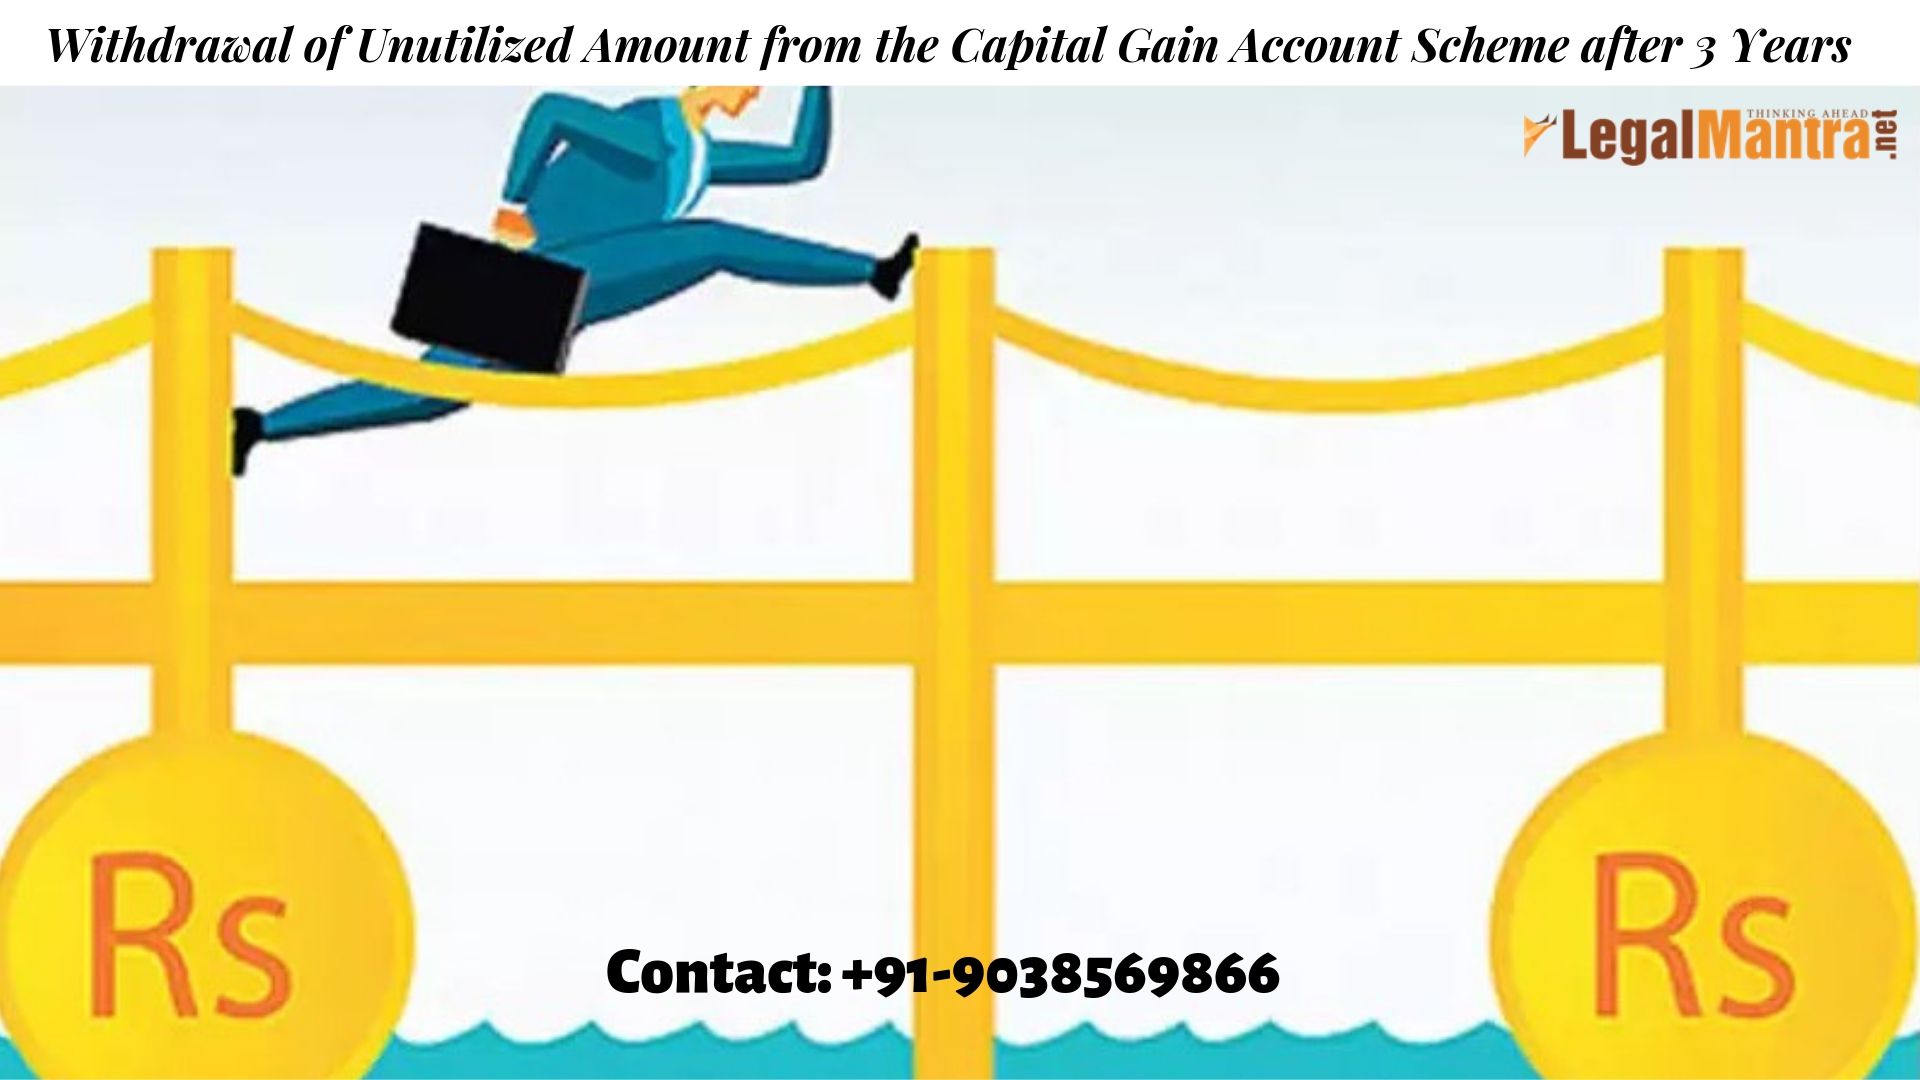 Withdrawal of Unutilized Amount from the Capital Gain Account Scheme after 3 Years